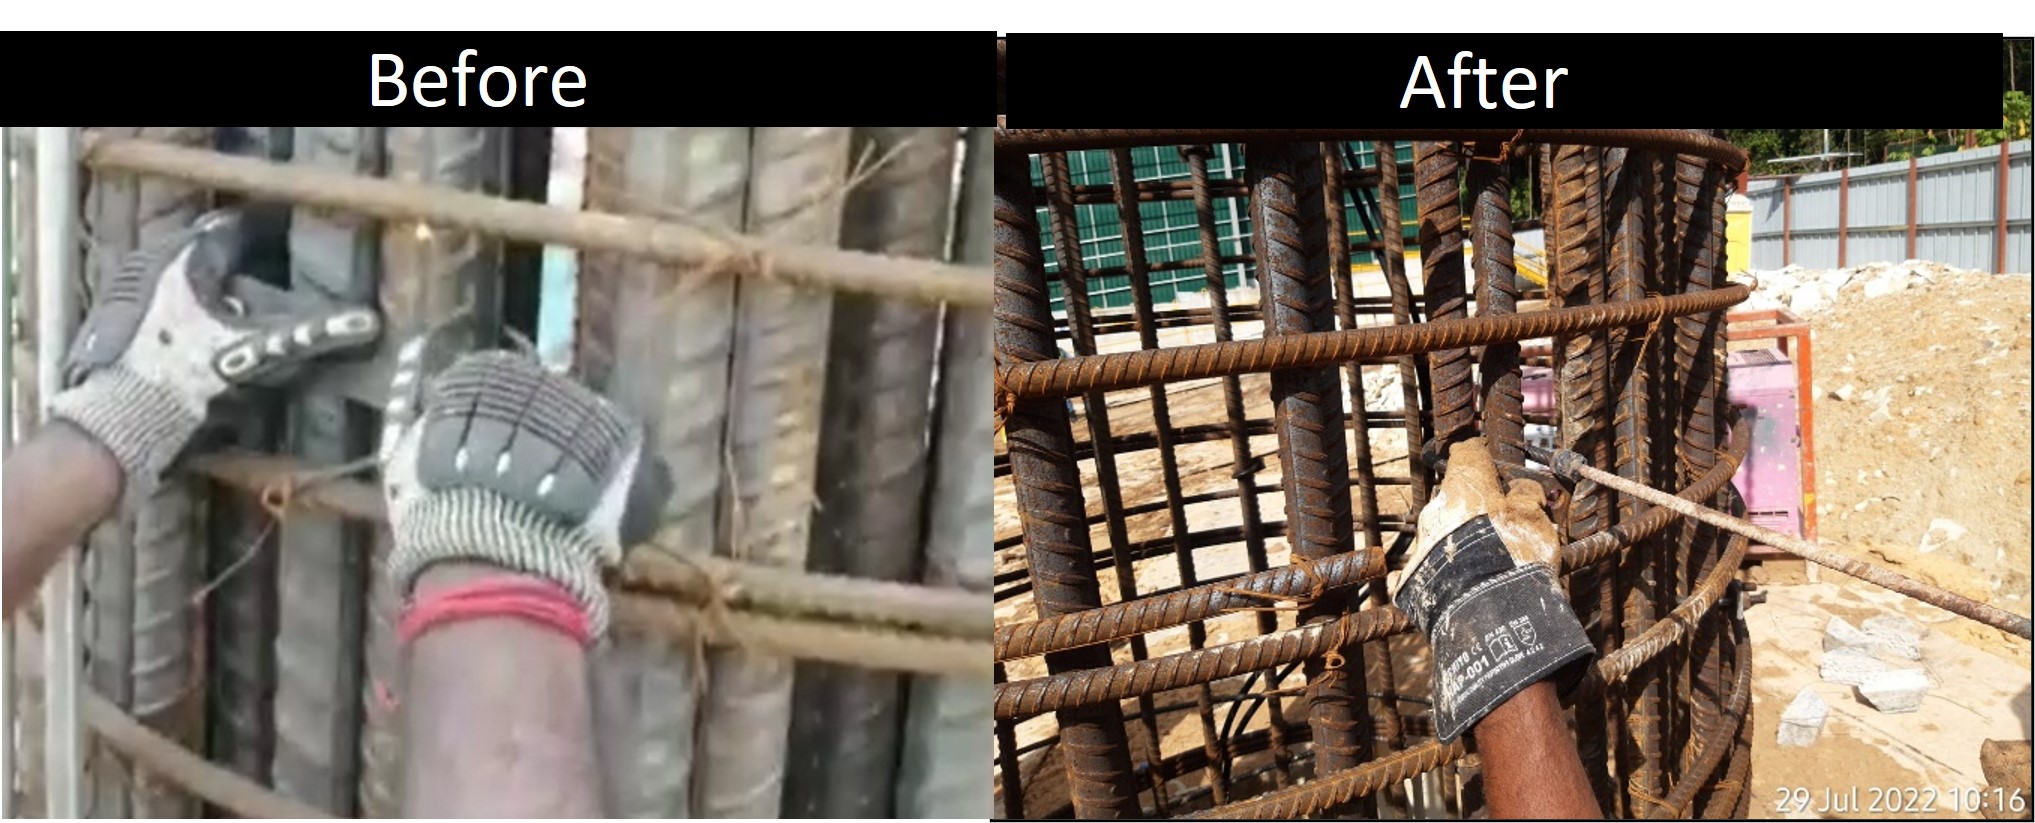 Figure 2: Instead of reaching into the rebar cage to install a U-Clip, an installation tool is used 